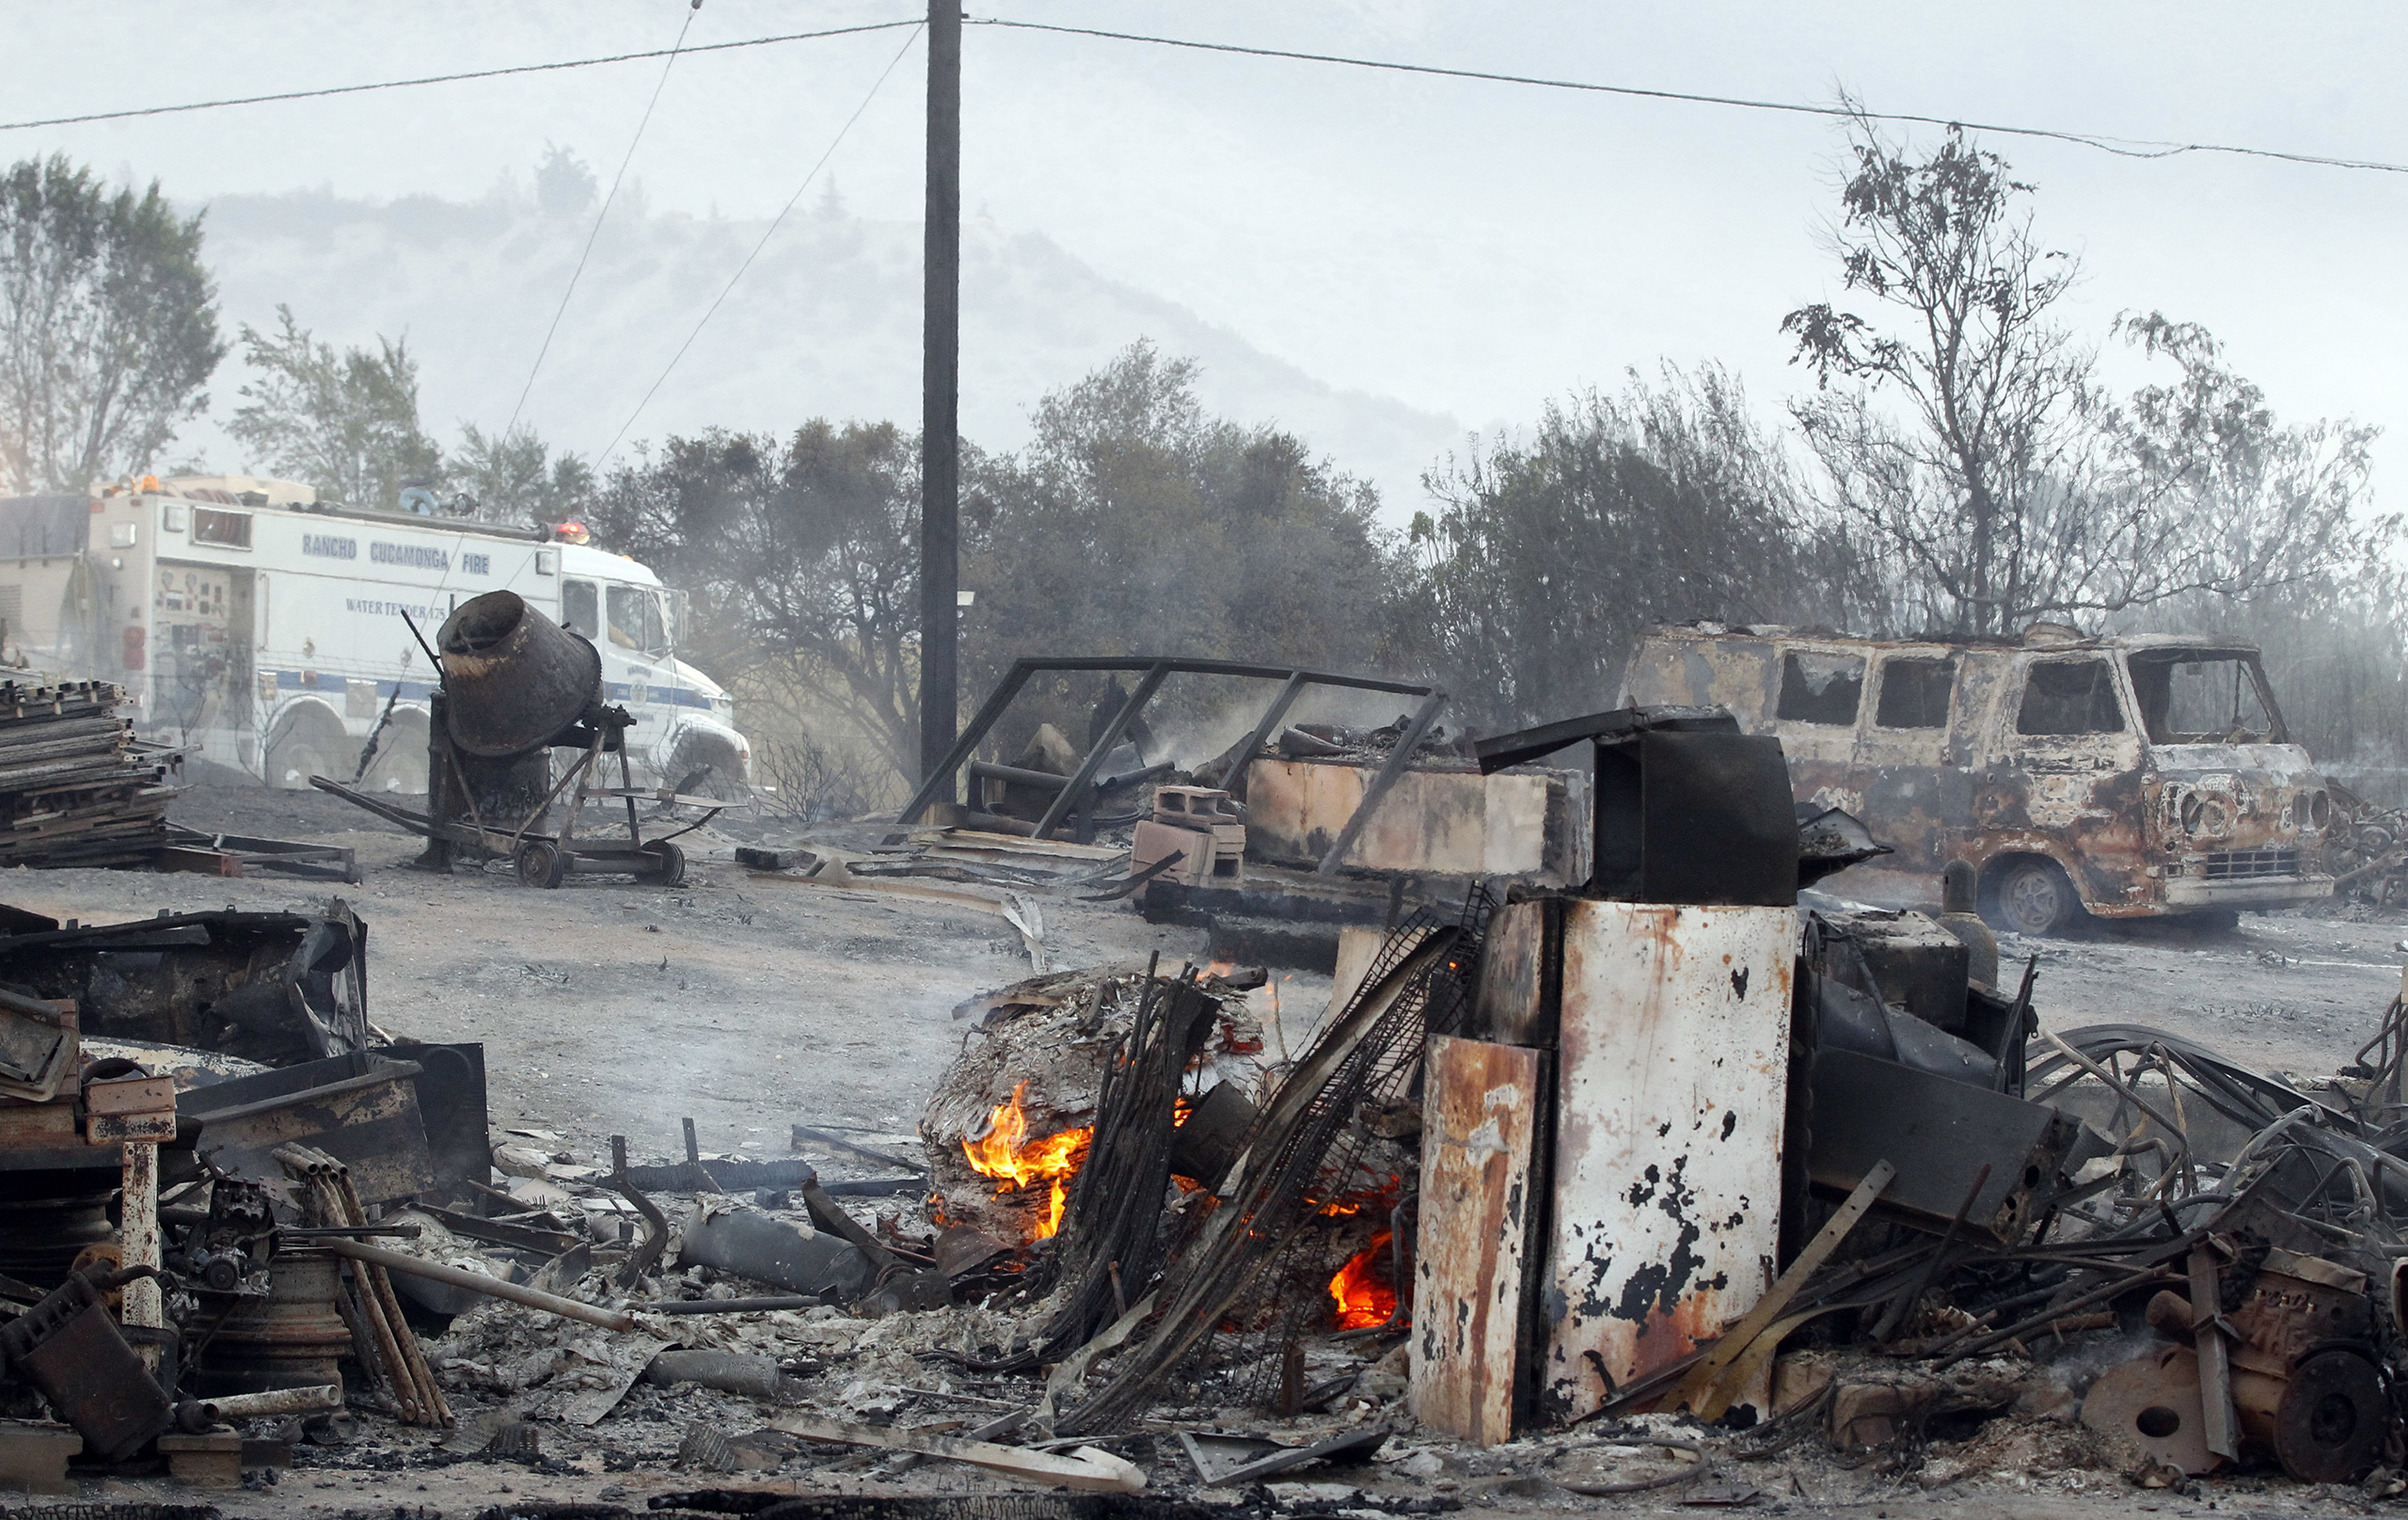 Burned property at Hess Road and Highway 138 shows the devastation of the Blue Cut fire in West Cajon Valley, Calif., Aug. 17, 2016.